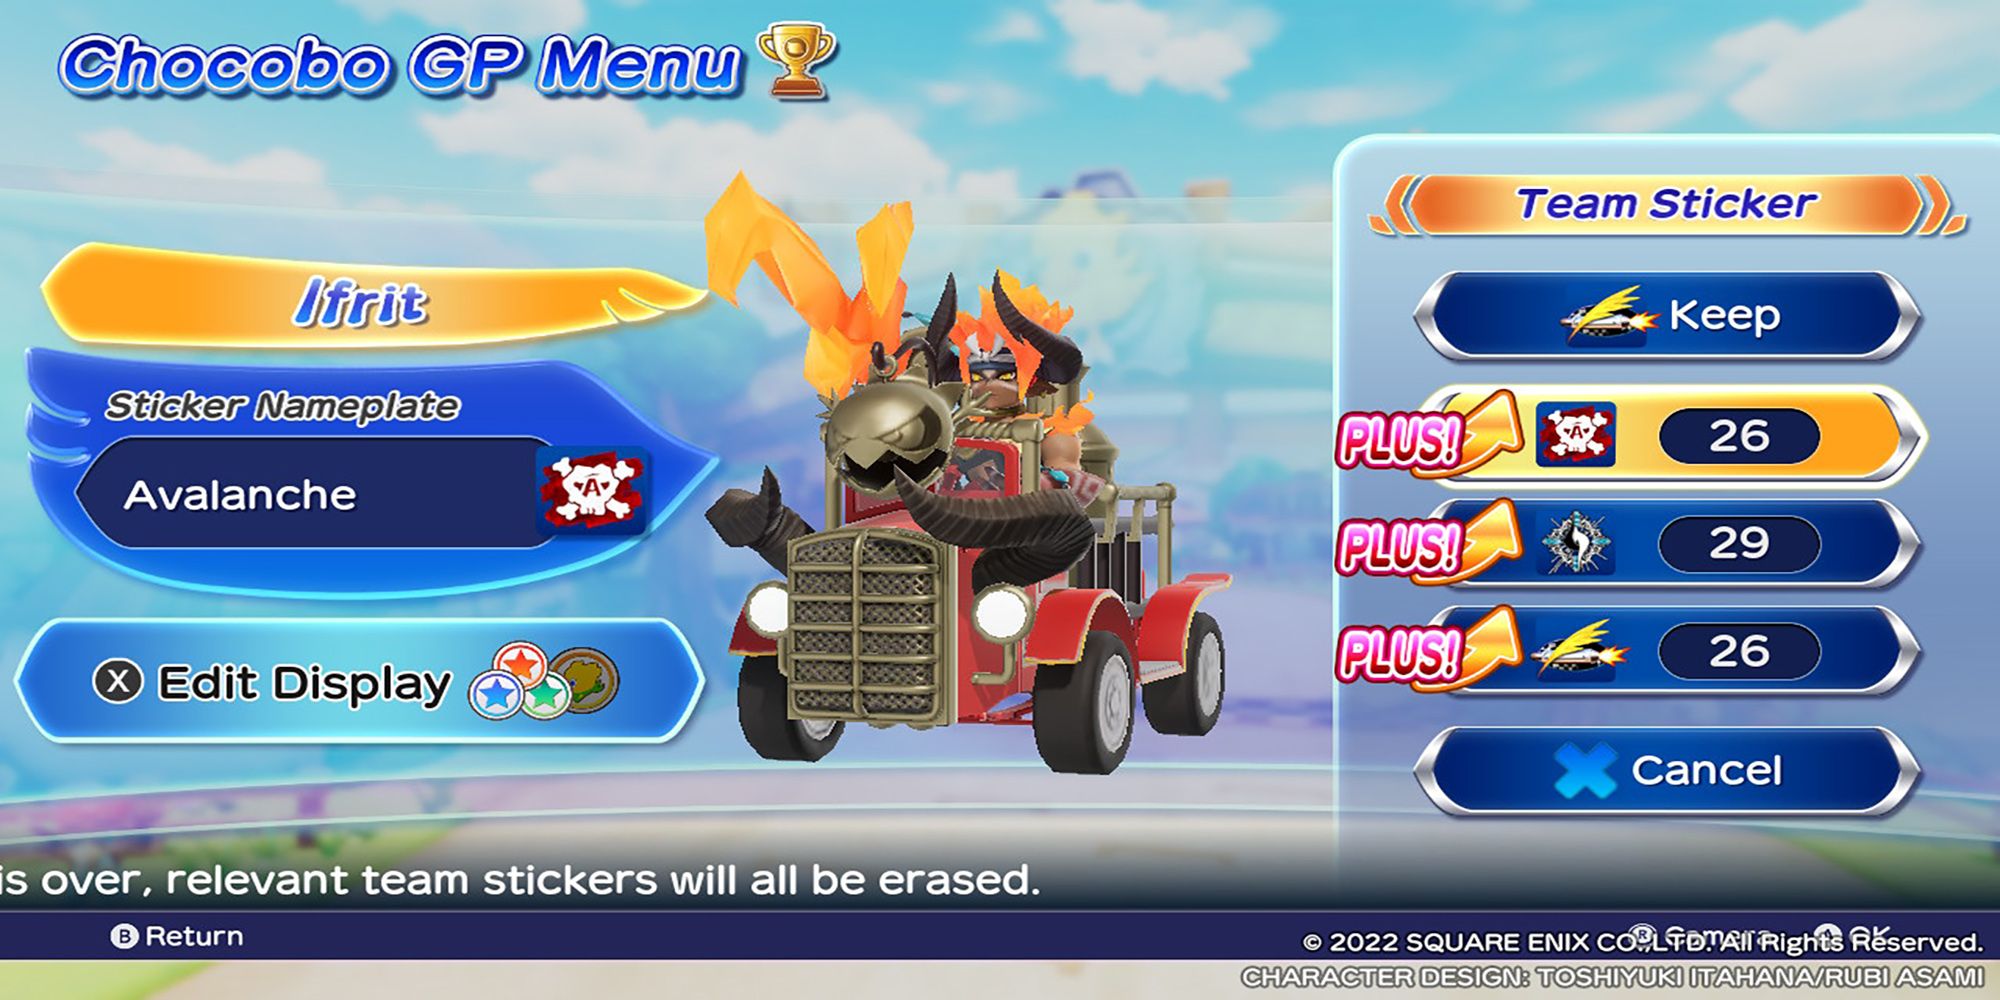 You can choose a team sticker for Ifrit in the Team Sticker menu before entering a Chocobo GP tournament.